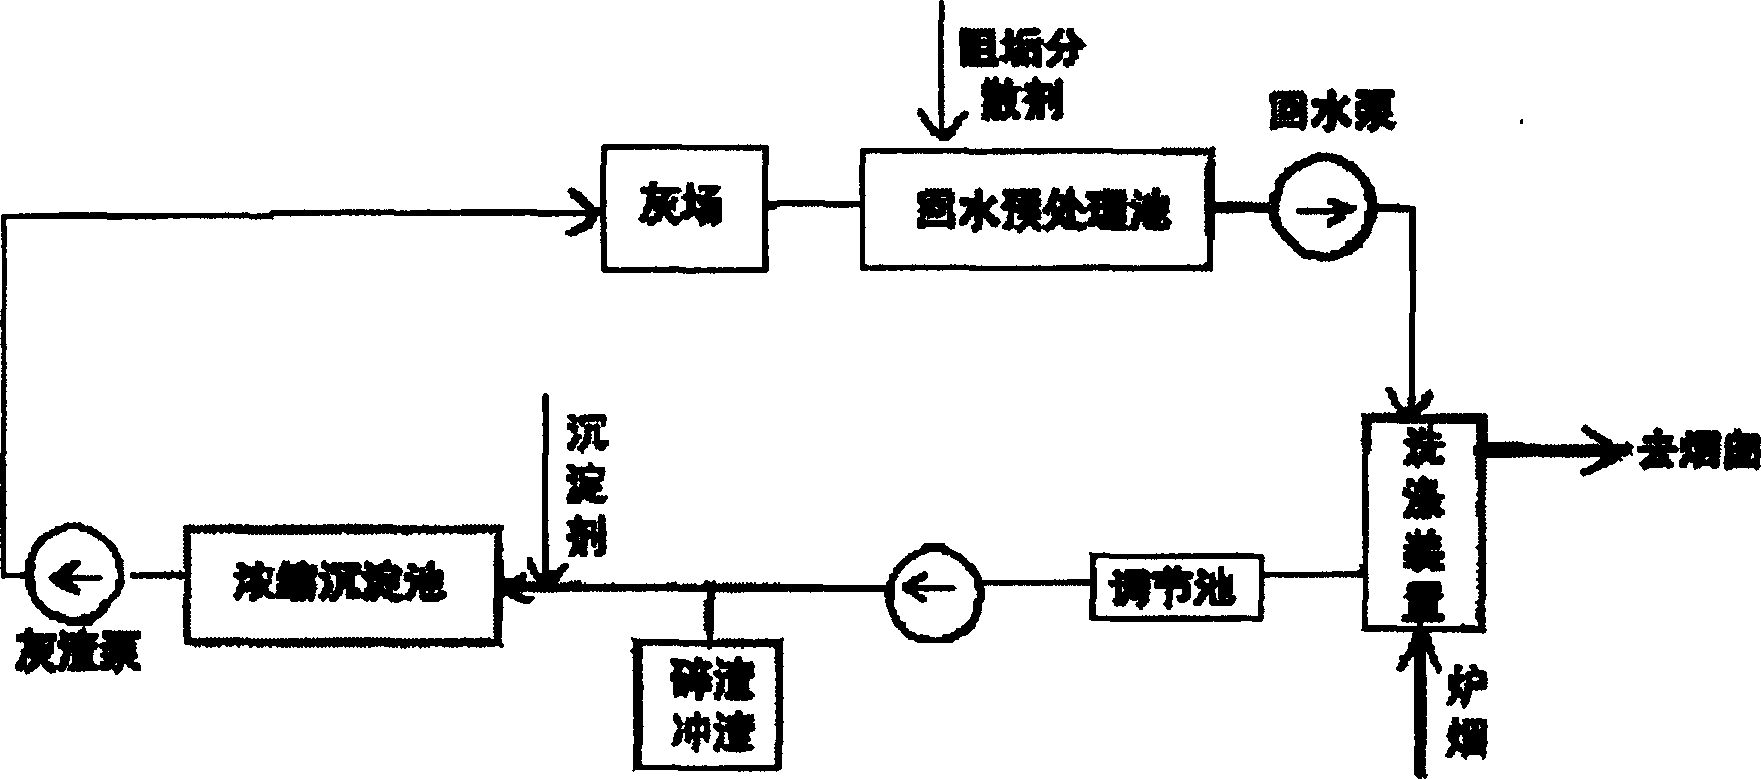 Technology for recovering ash water of coal-fired power plant and system of sealing circulating for recovering thereof